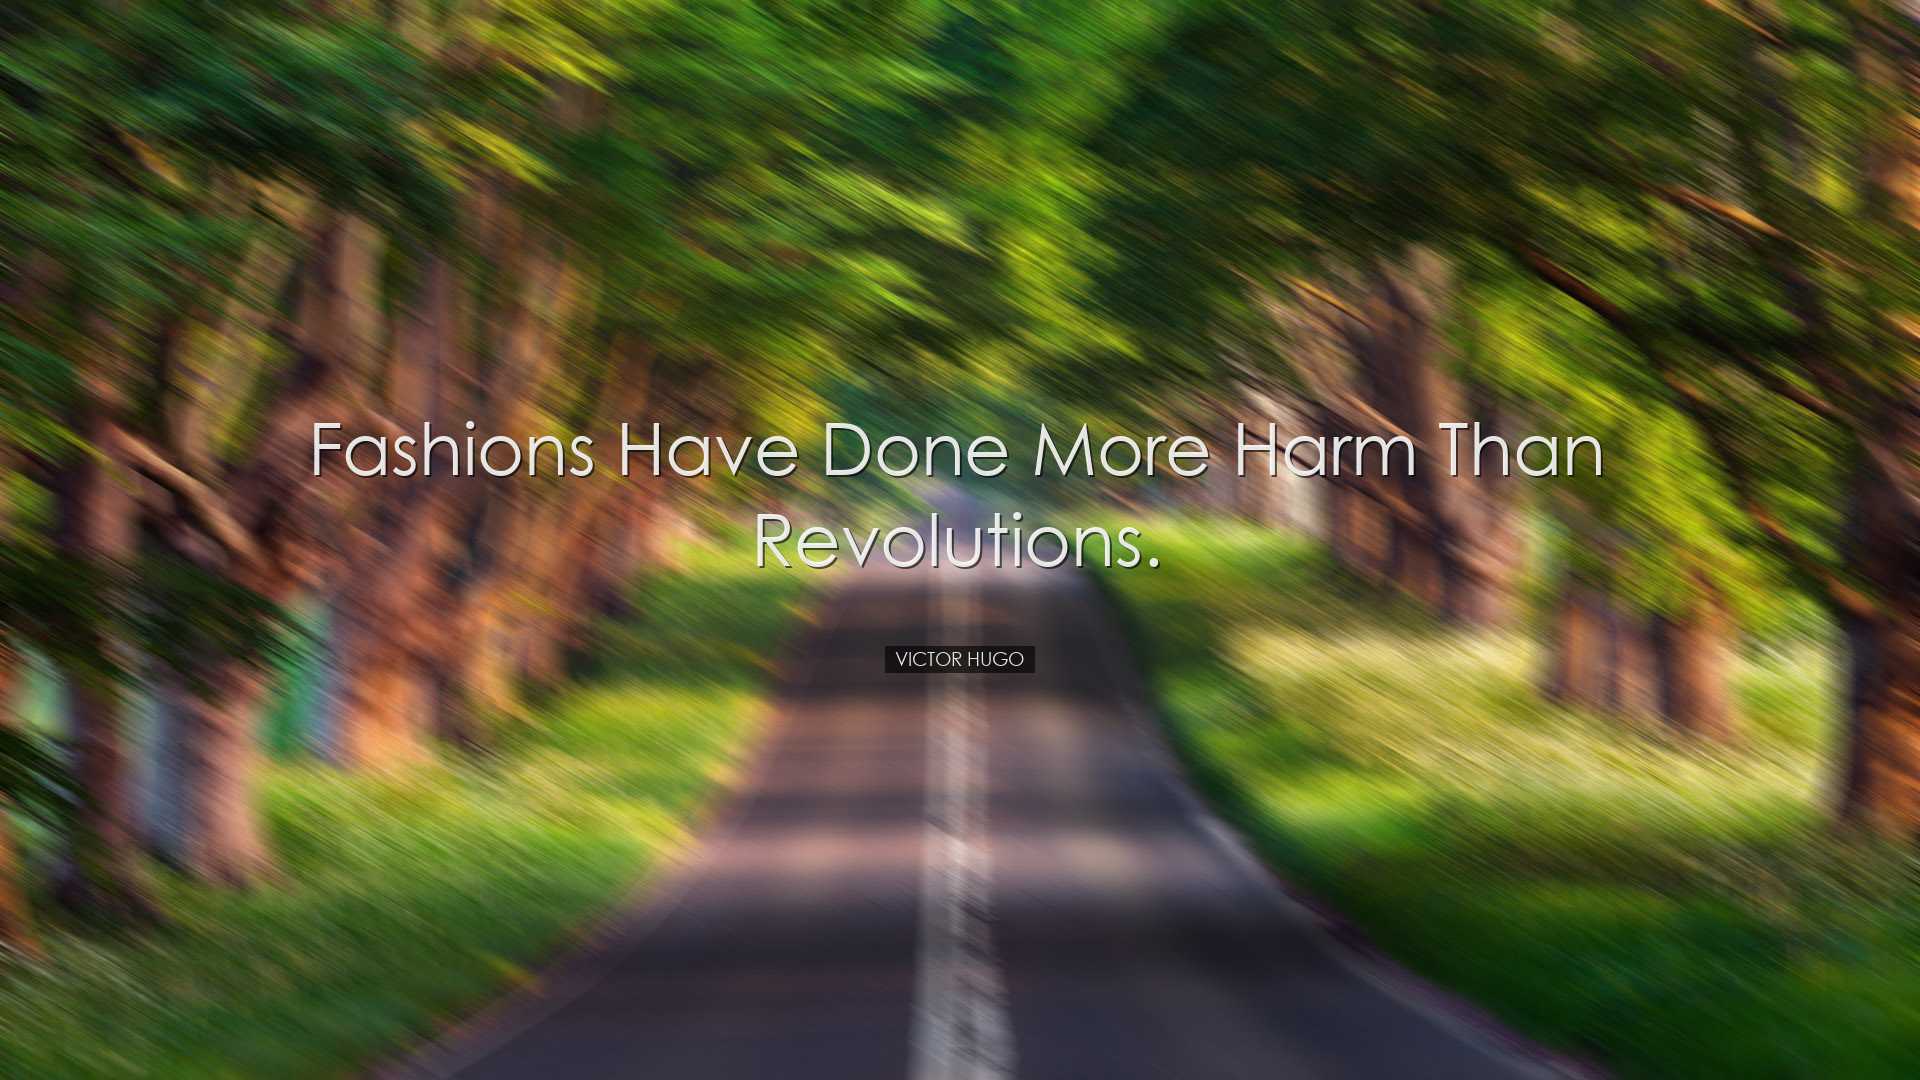 Fashions have done more harm than revolutions. - Victor Hugo